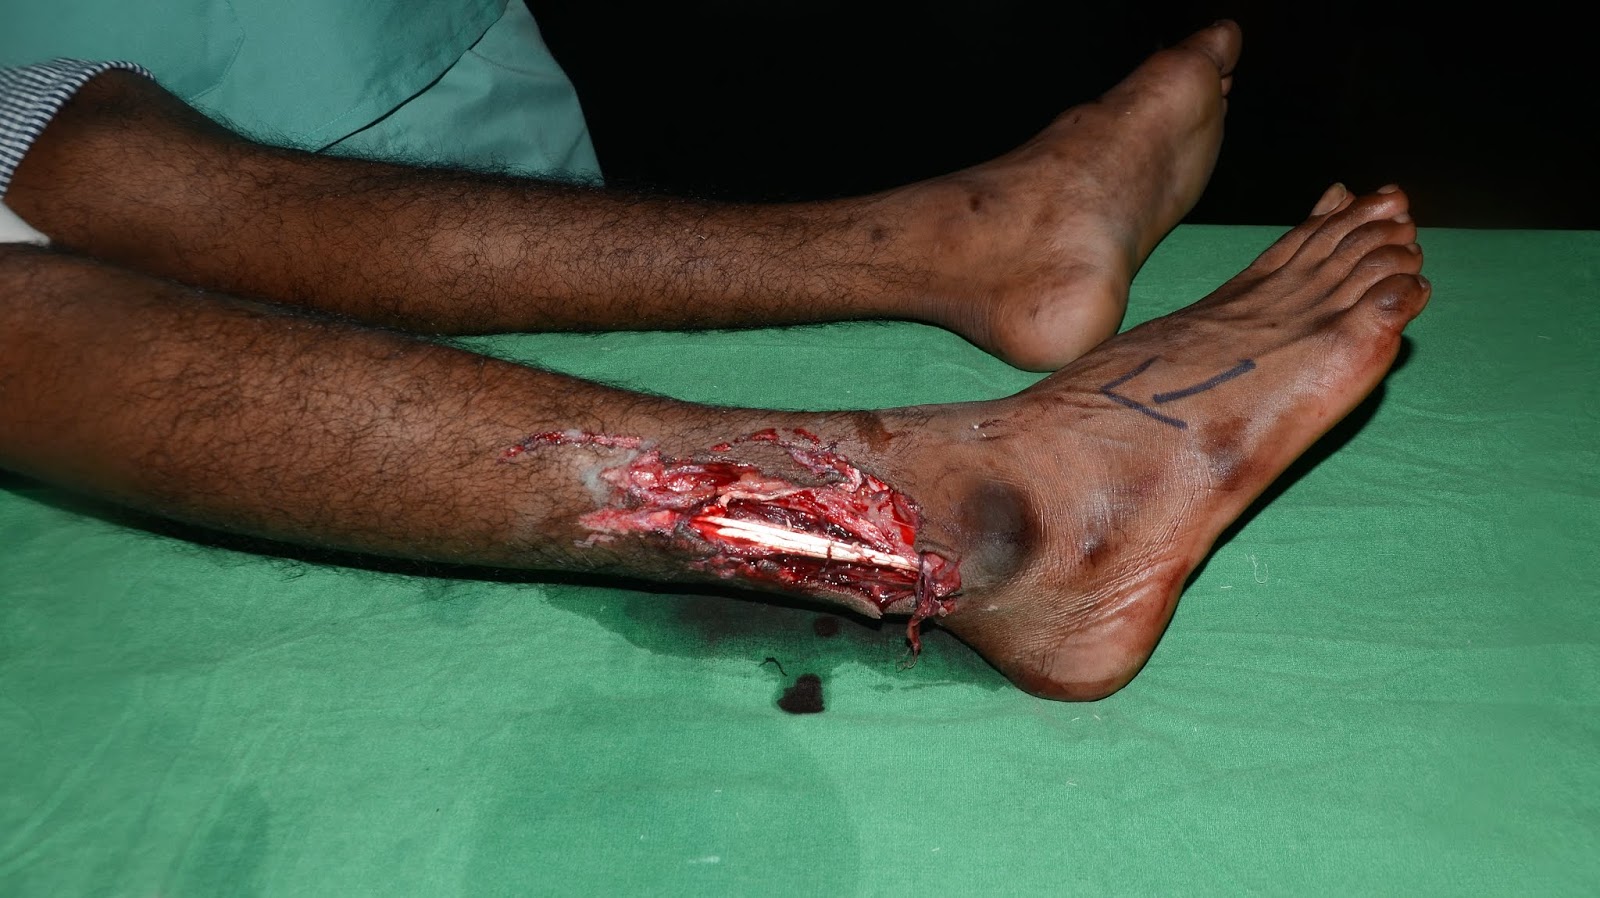 CRUSH INJURY FOOT, LOWER LIMB INJURIES AND LIMB SALVAGE: CRUSH INJURY LEG -  MICROVASCULAR FREE GRACILIS MUSCLE FLAP AND SKIN GRAFTING - OUTCOME